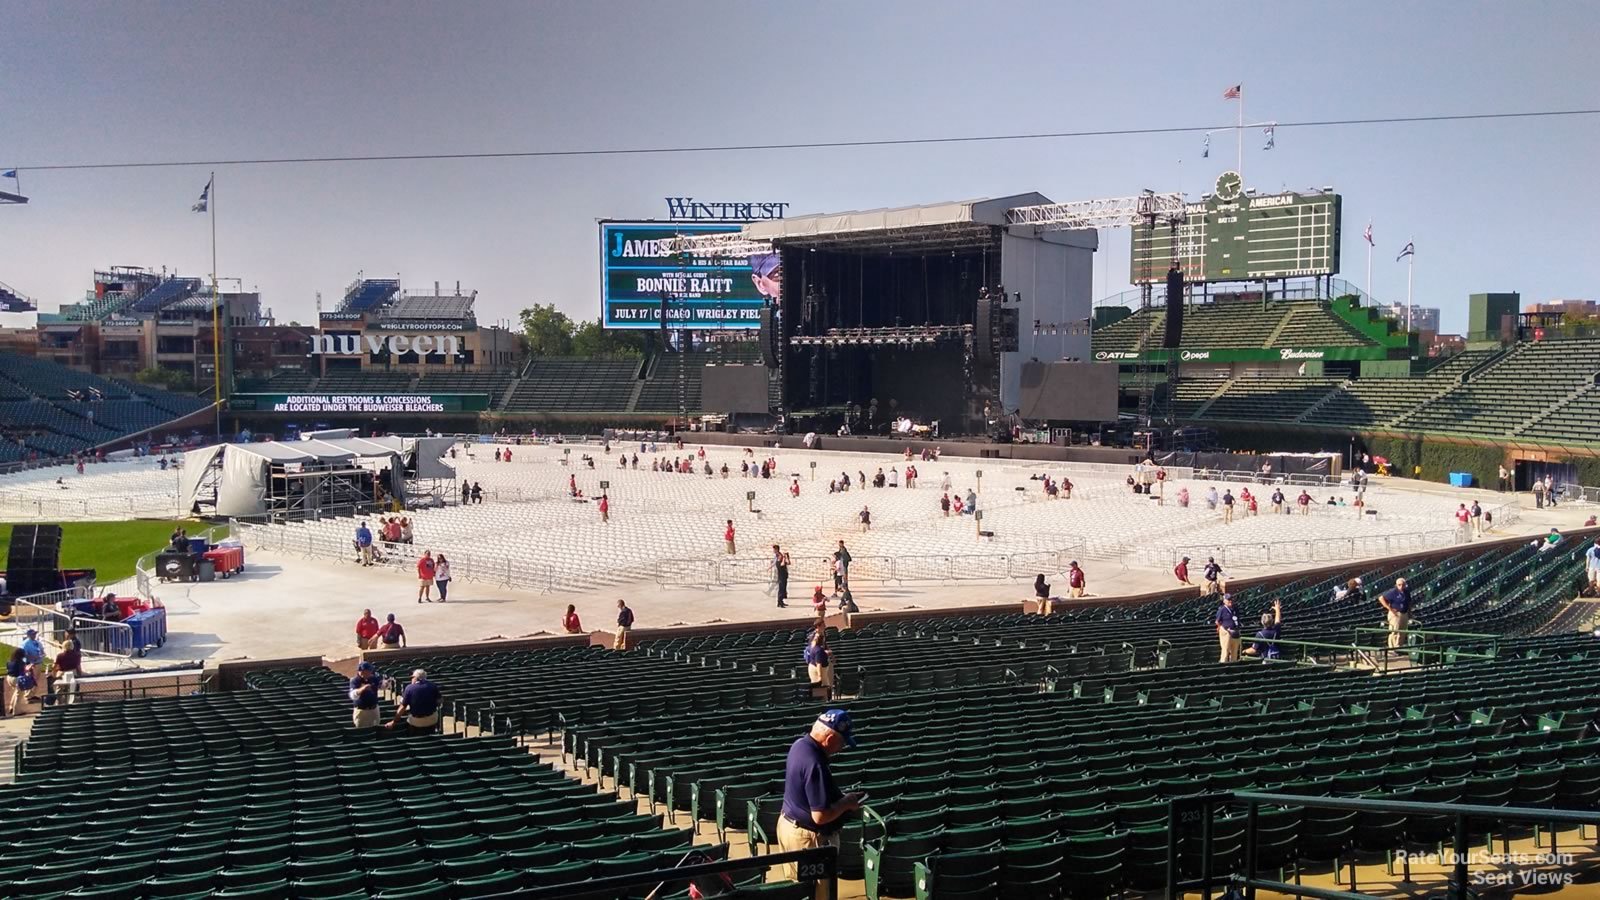 section 226, row 7 seat view  for concert - wrigley field